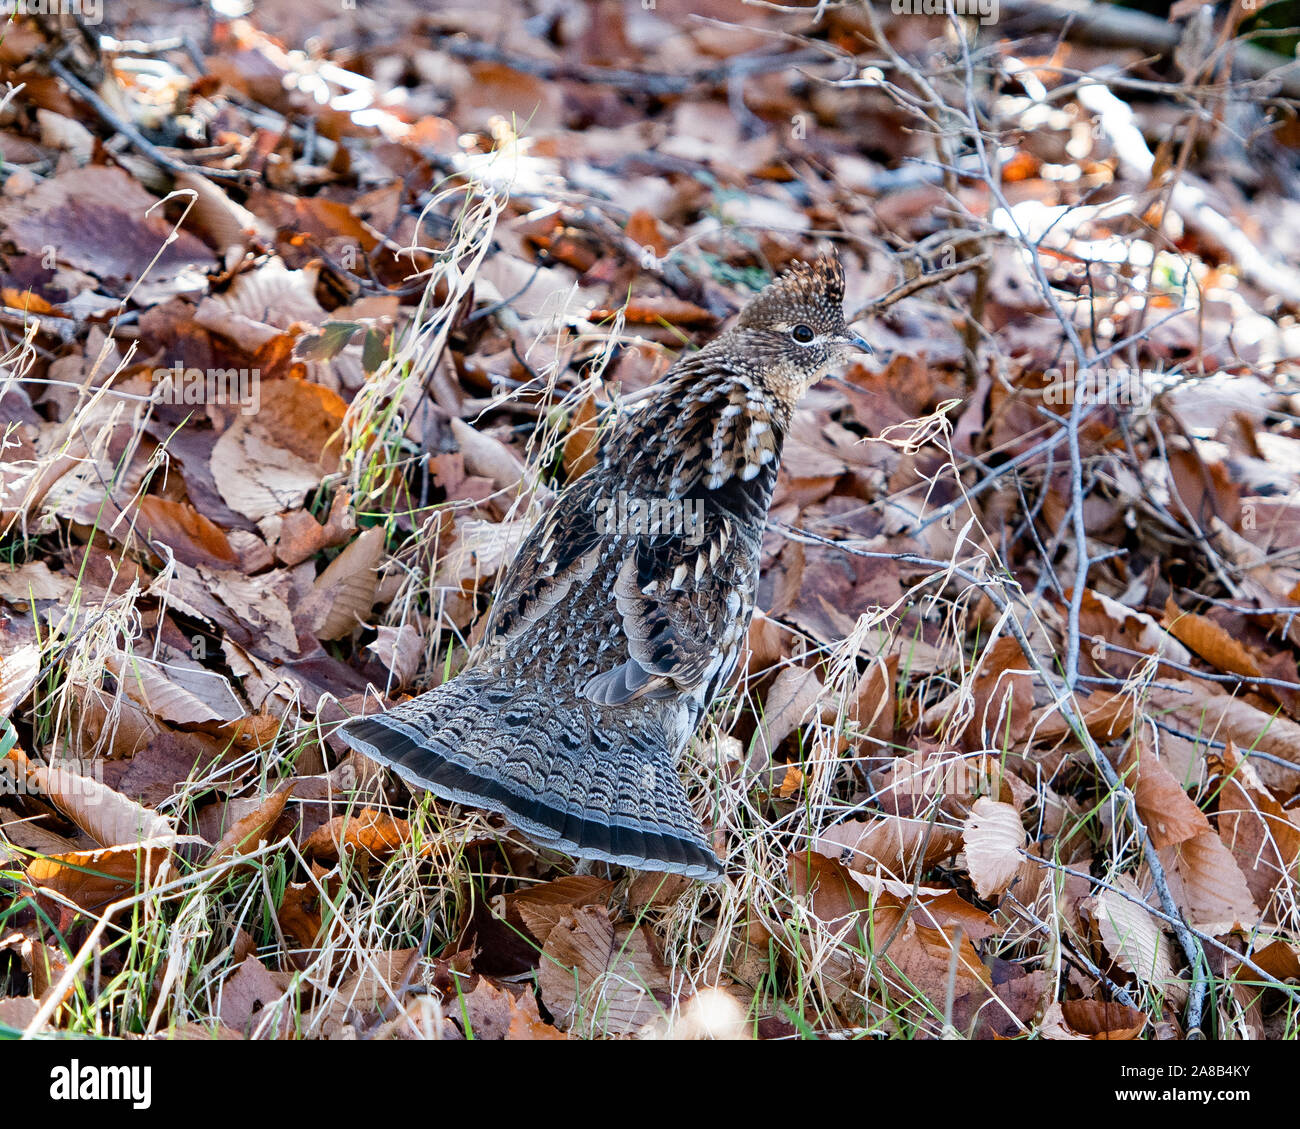 A Ruffed Grouse, Bonasa umbellus, walking through fallen leaves and dead grasses on the forest floor in the Adirondack Mountains, NY USA Stock Photo